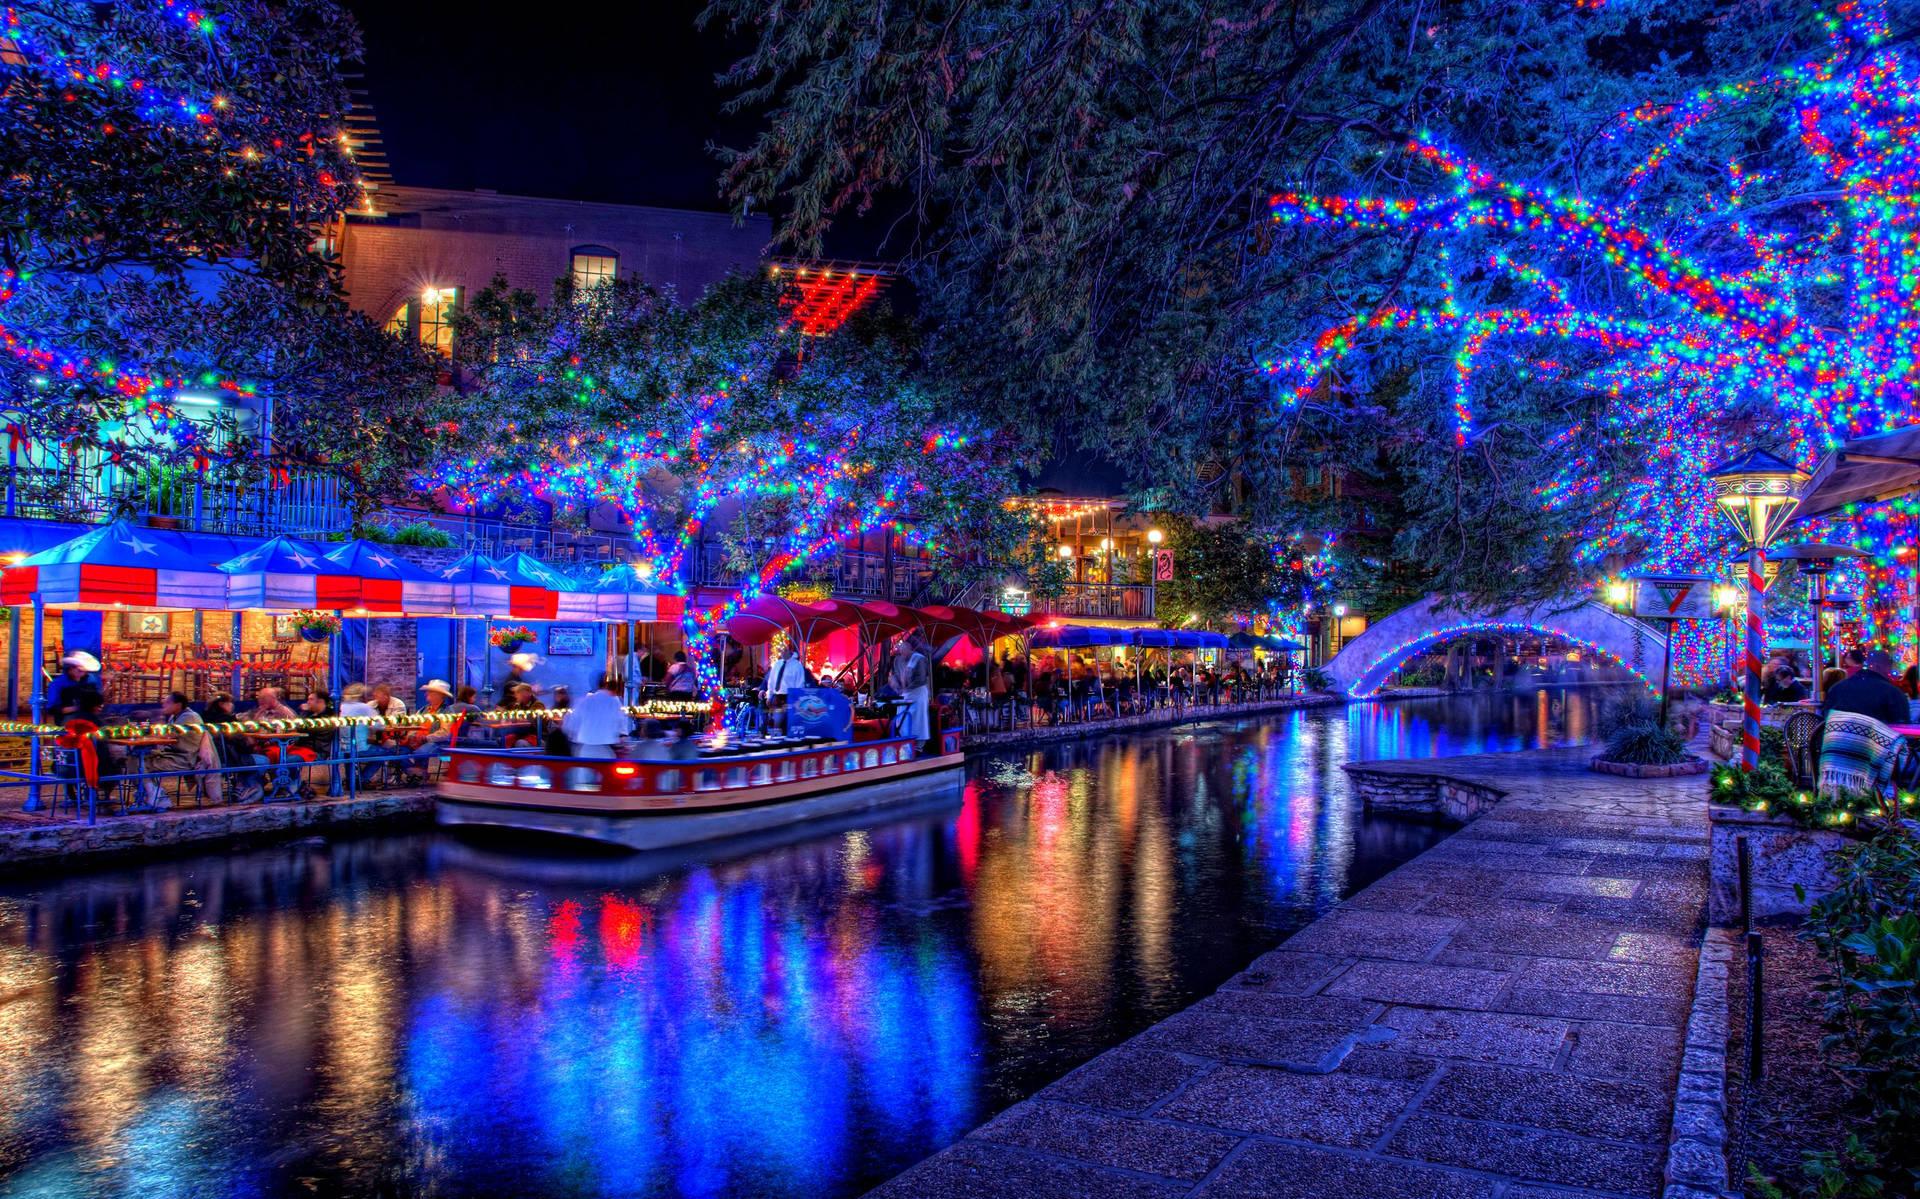 Enjoy The Enchantment And Holidays With A River Walk